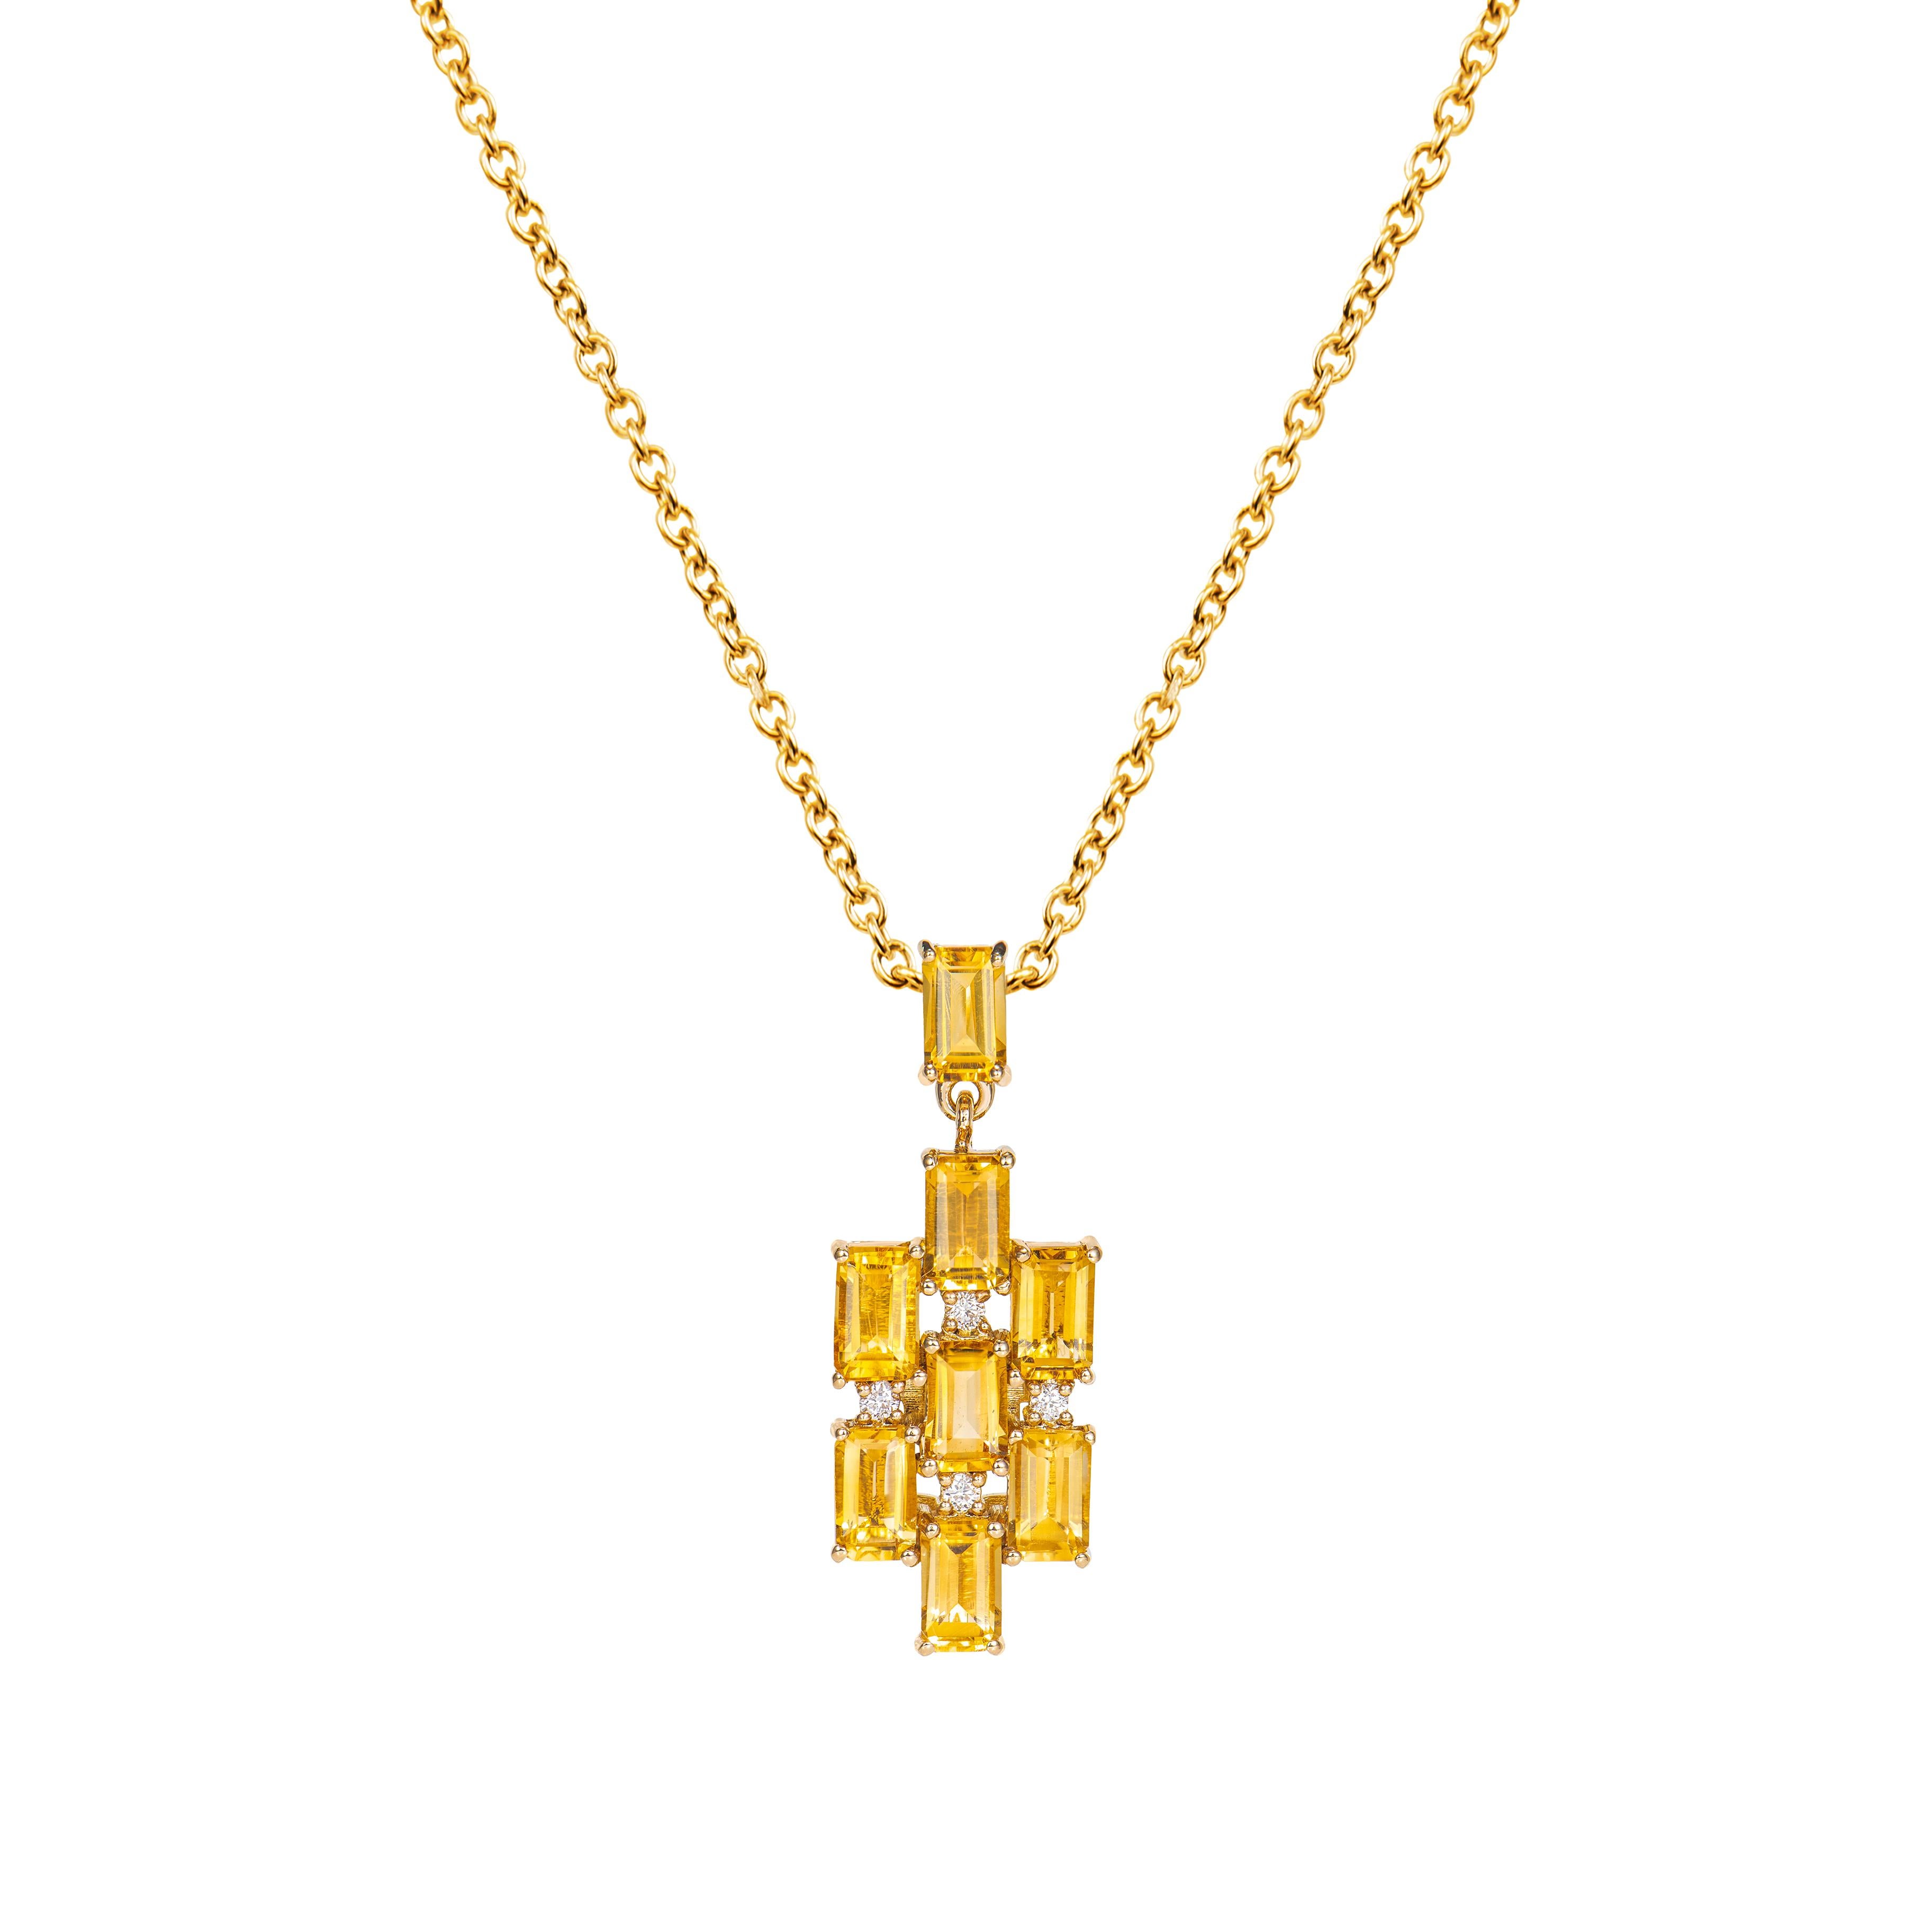 Octagon Cut 2.31 Carat Citrine Pendant in 18Karat Yellow Gold with White Diamond. For Sale